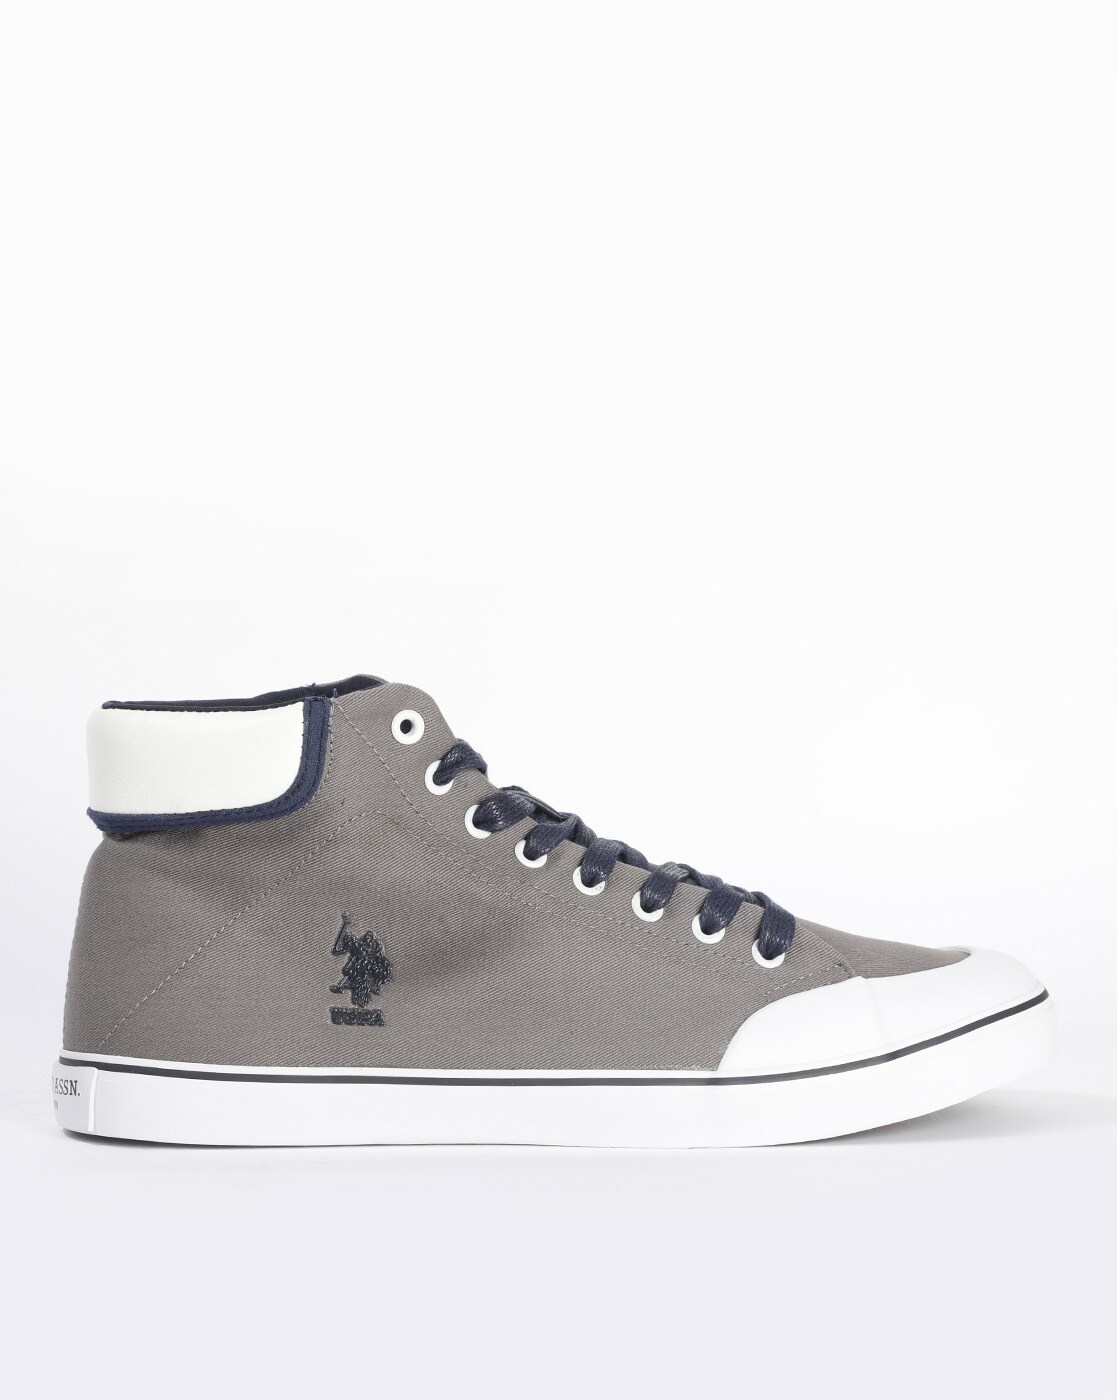 Grey Sneakers for Men by U.S. Polo Assn 